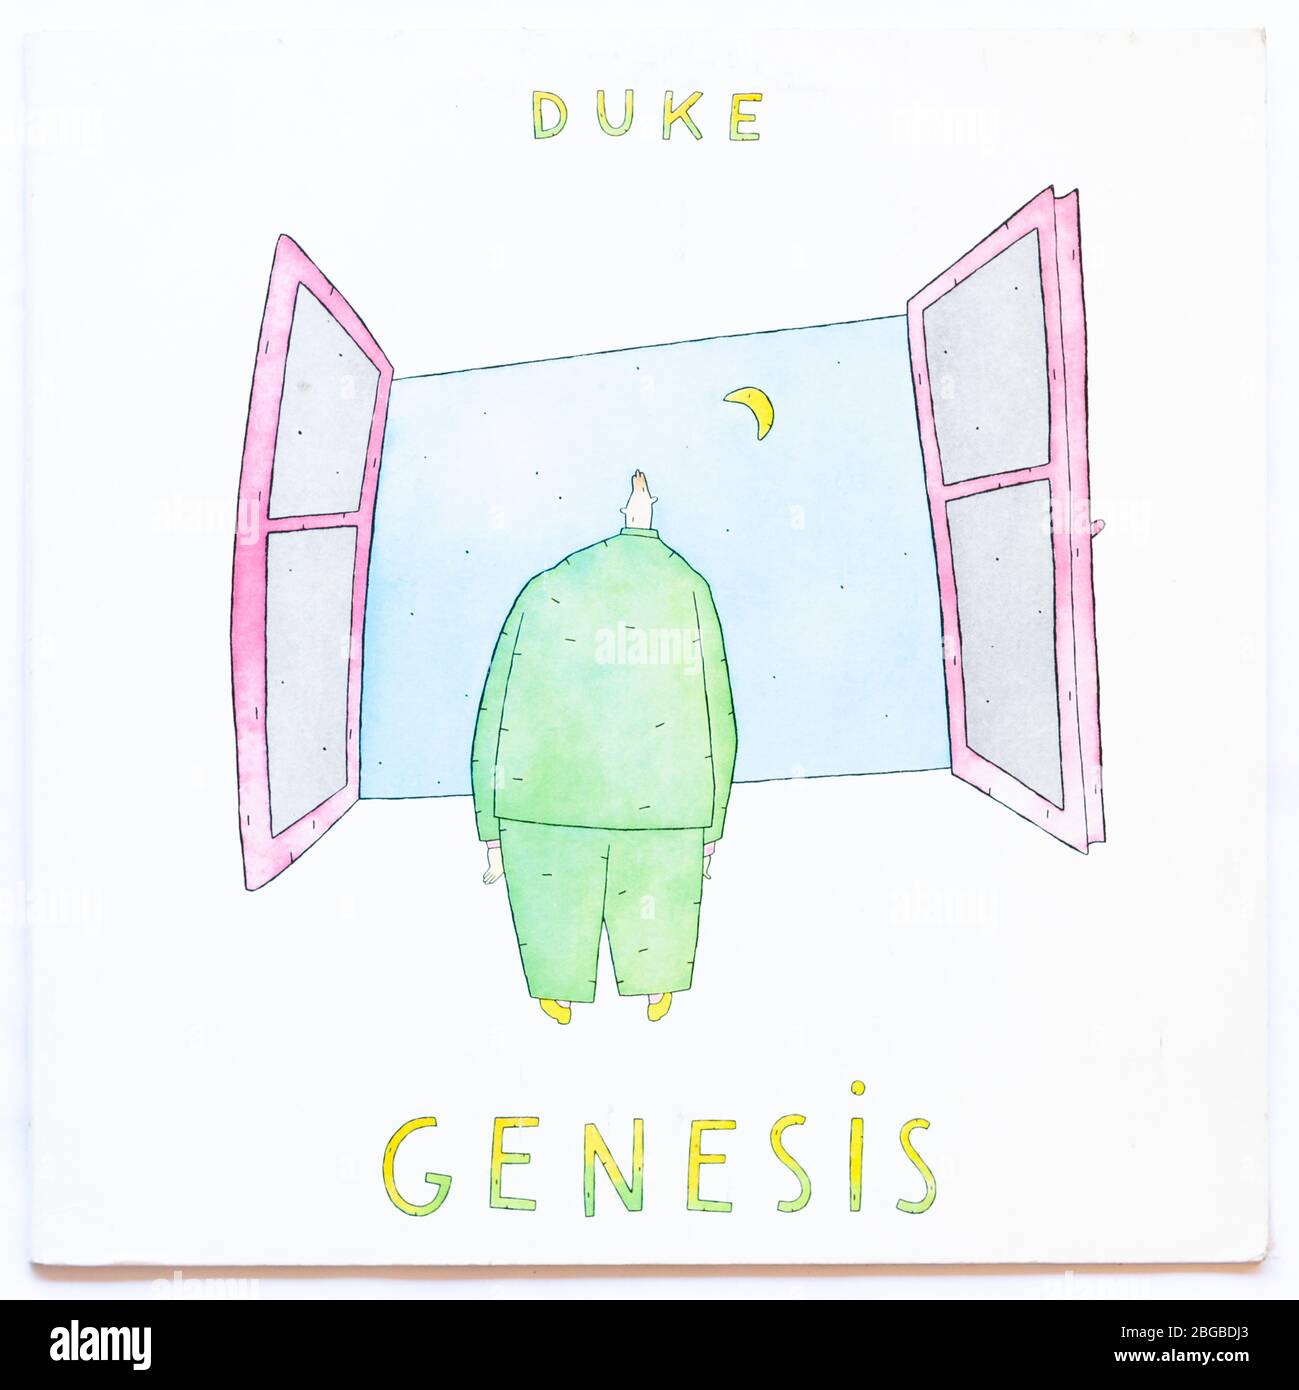 The cover of Duke, 1980 album by Genesis on Charisma - Editorial use only Stock Photo